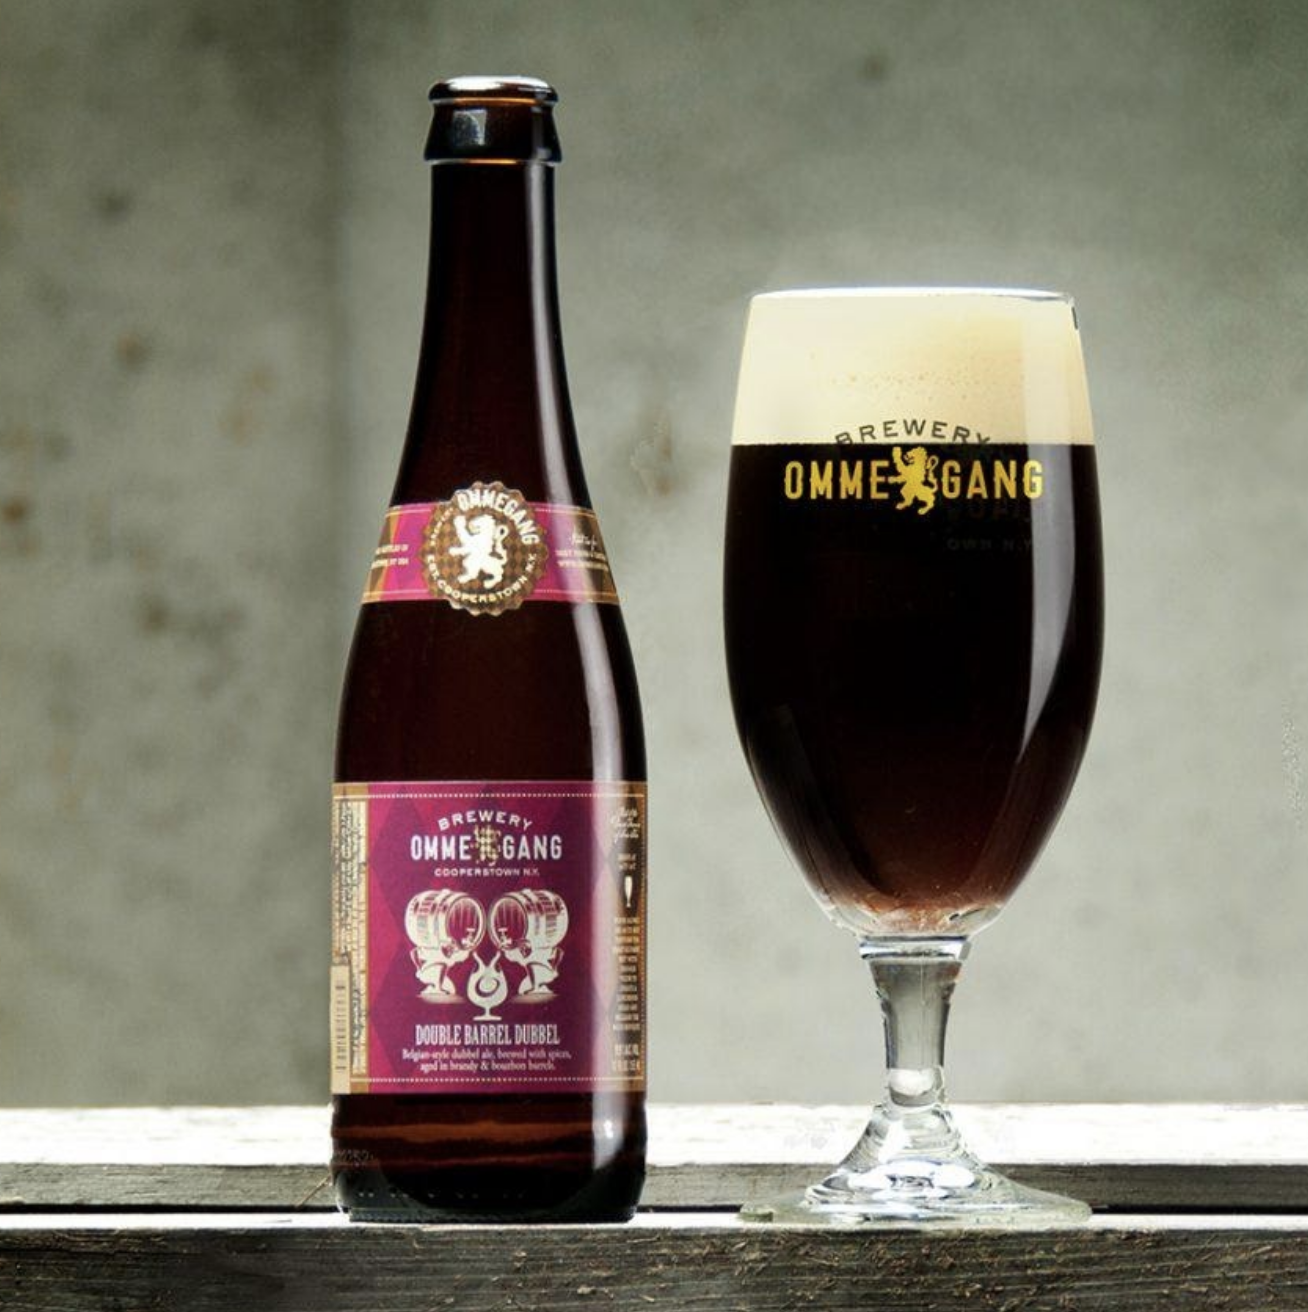 Brewery Ommegang